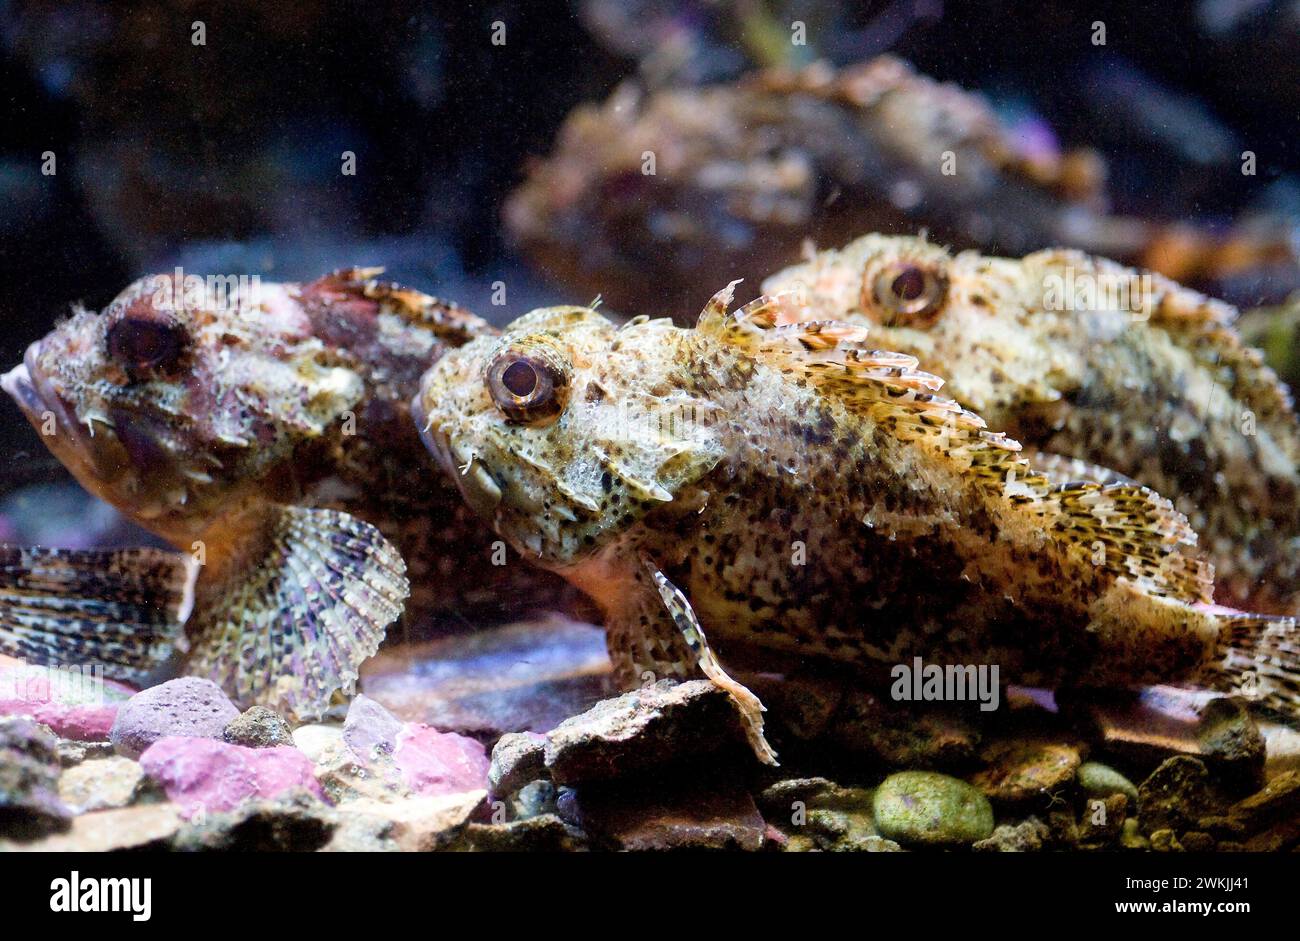 Small red scorpionfish (Scorpaena notata) is a poisonous marine fish native to Mediterranean Sea and eastern Atlantic Ocean from France to Senegal. Stock Photo